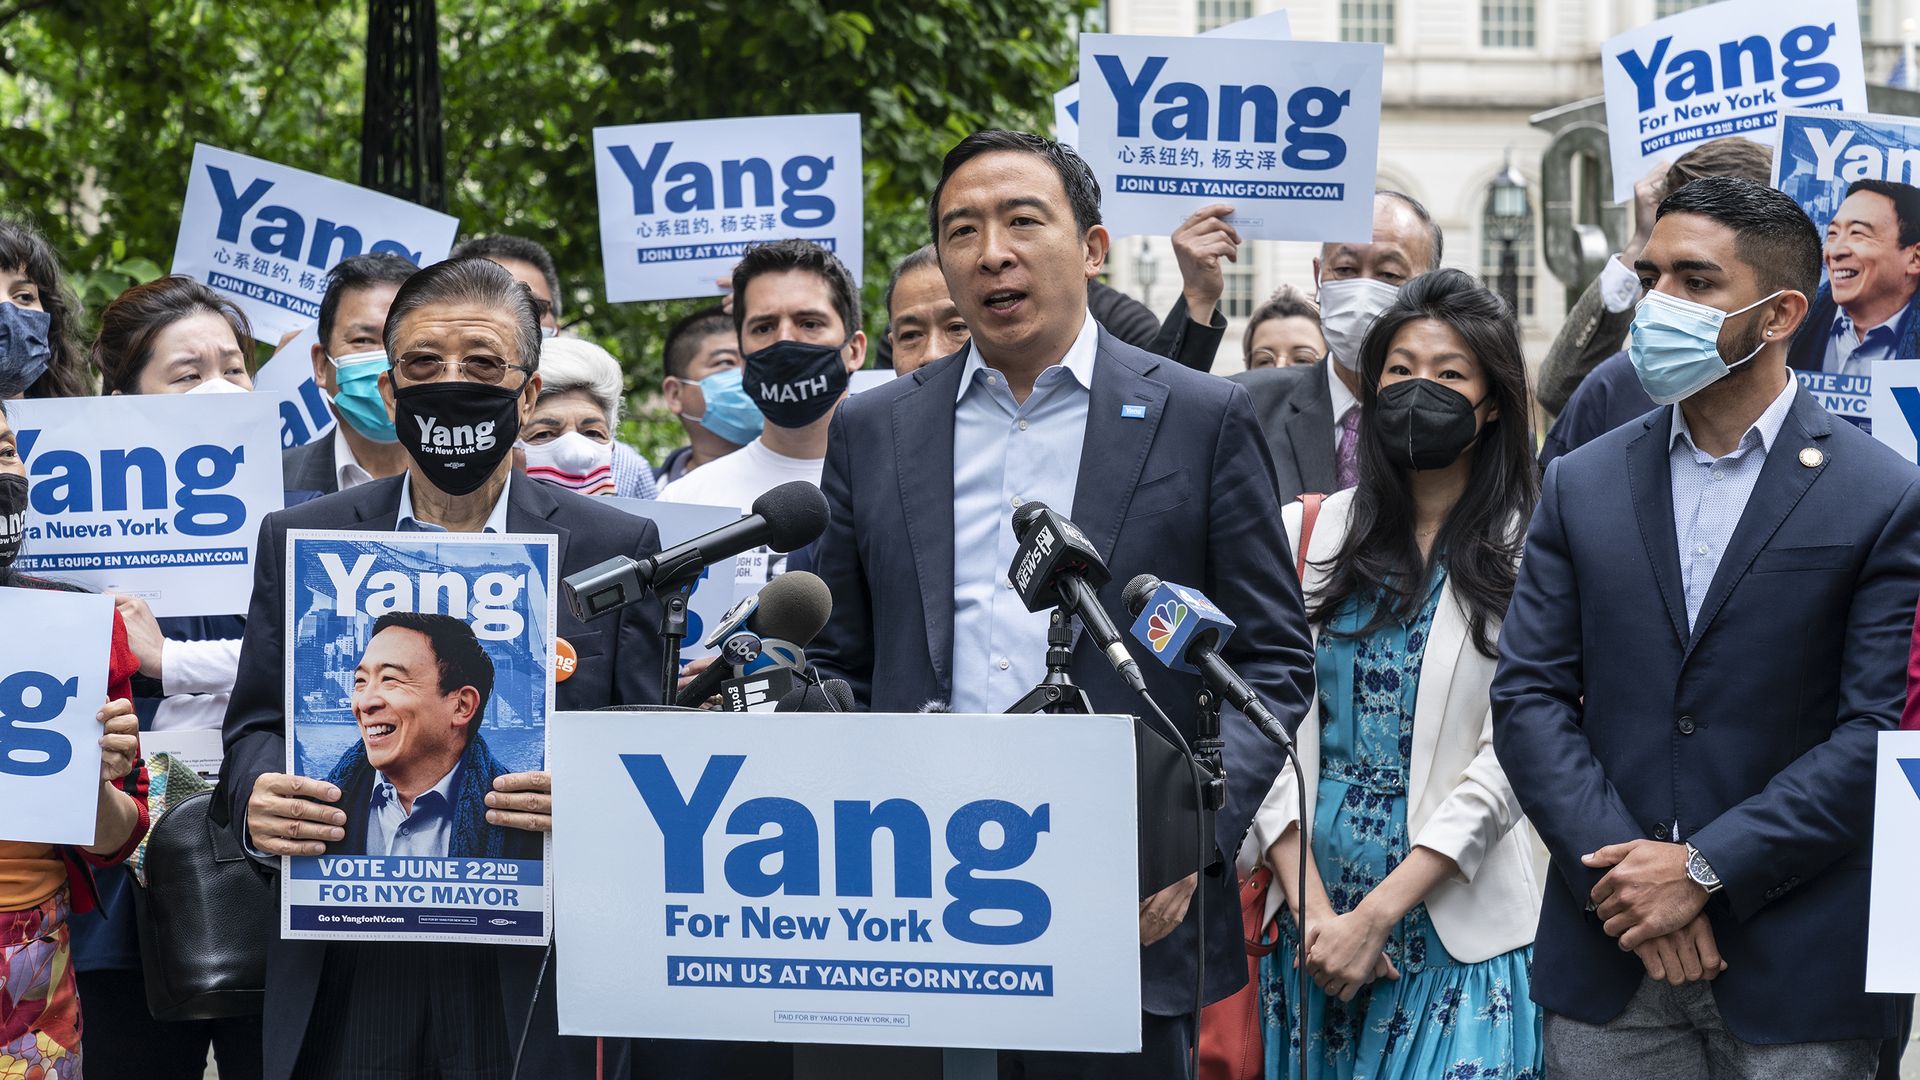 Photo of Andrew Yang speaking from a podium with a crowd of people holding signs supporting Yang behind him